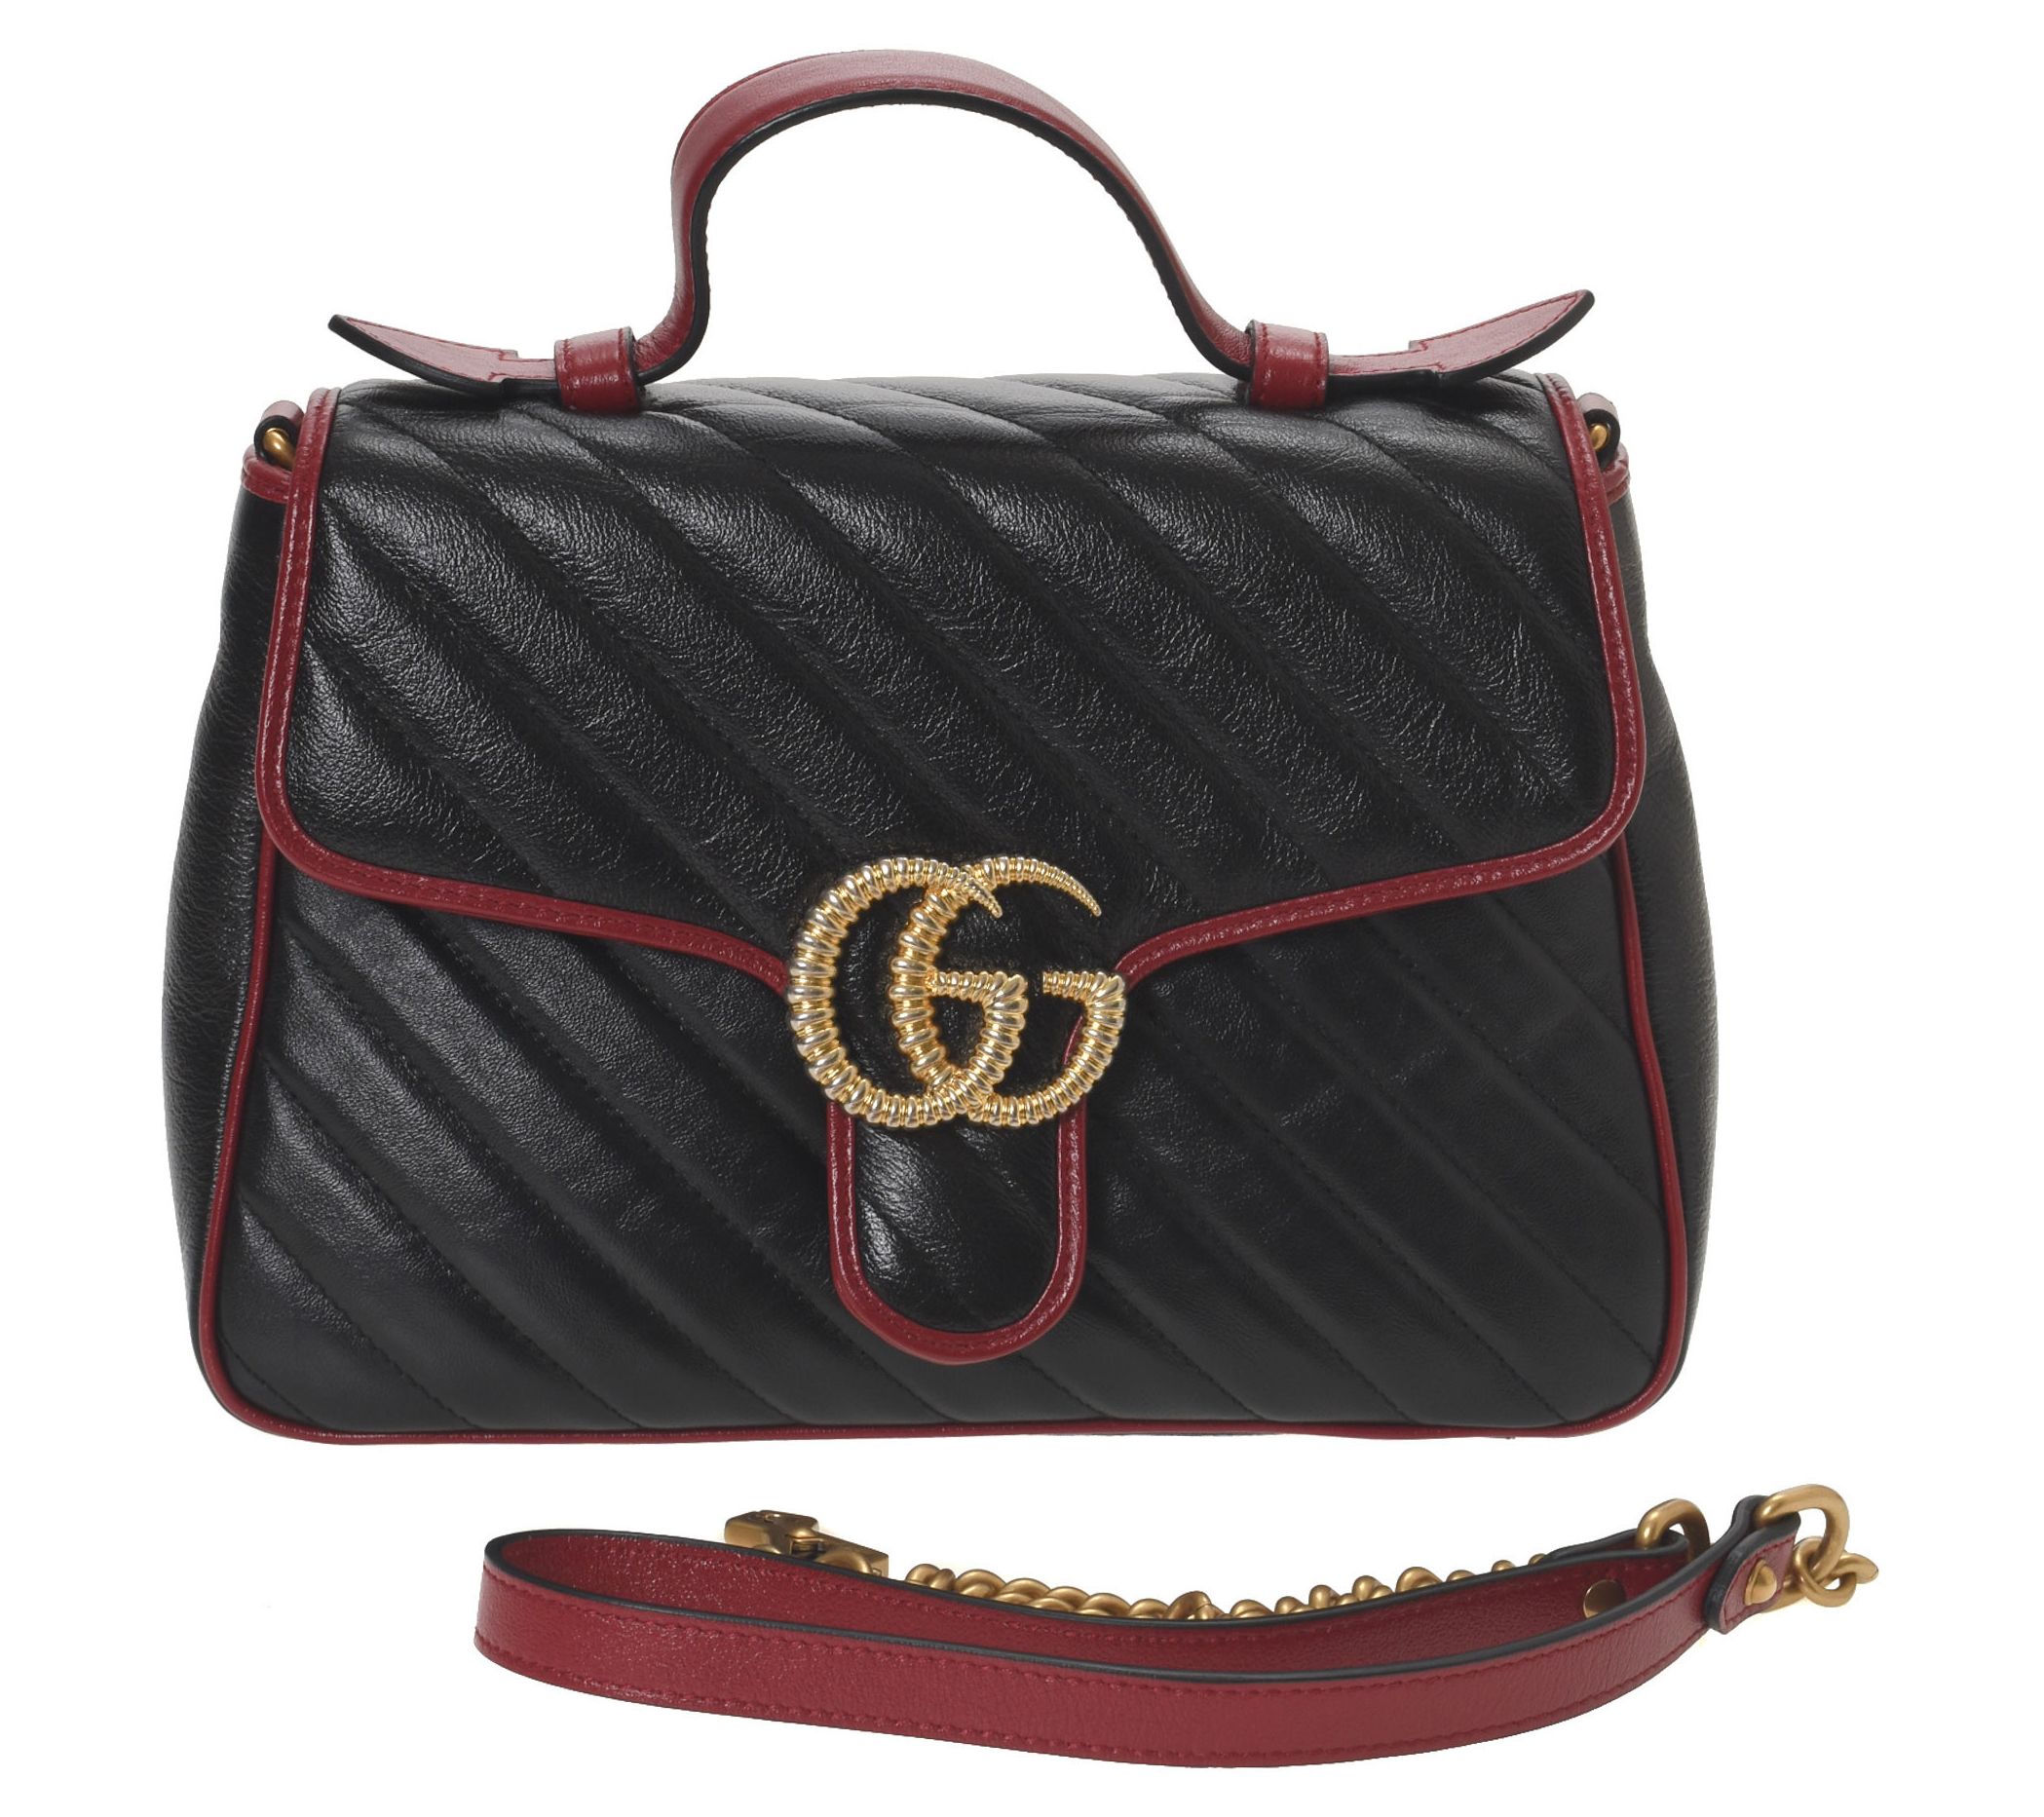 redde Til fods Investere Pre-Owned Gucci GG Marmont Small Top Handle Bag - QVC.com